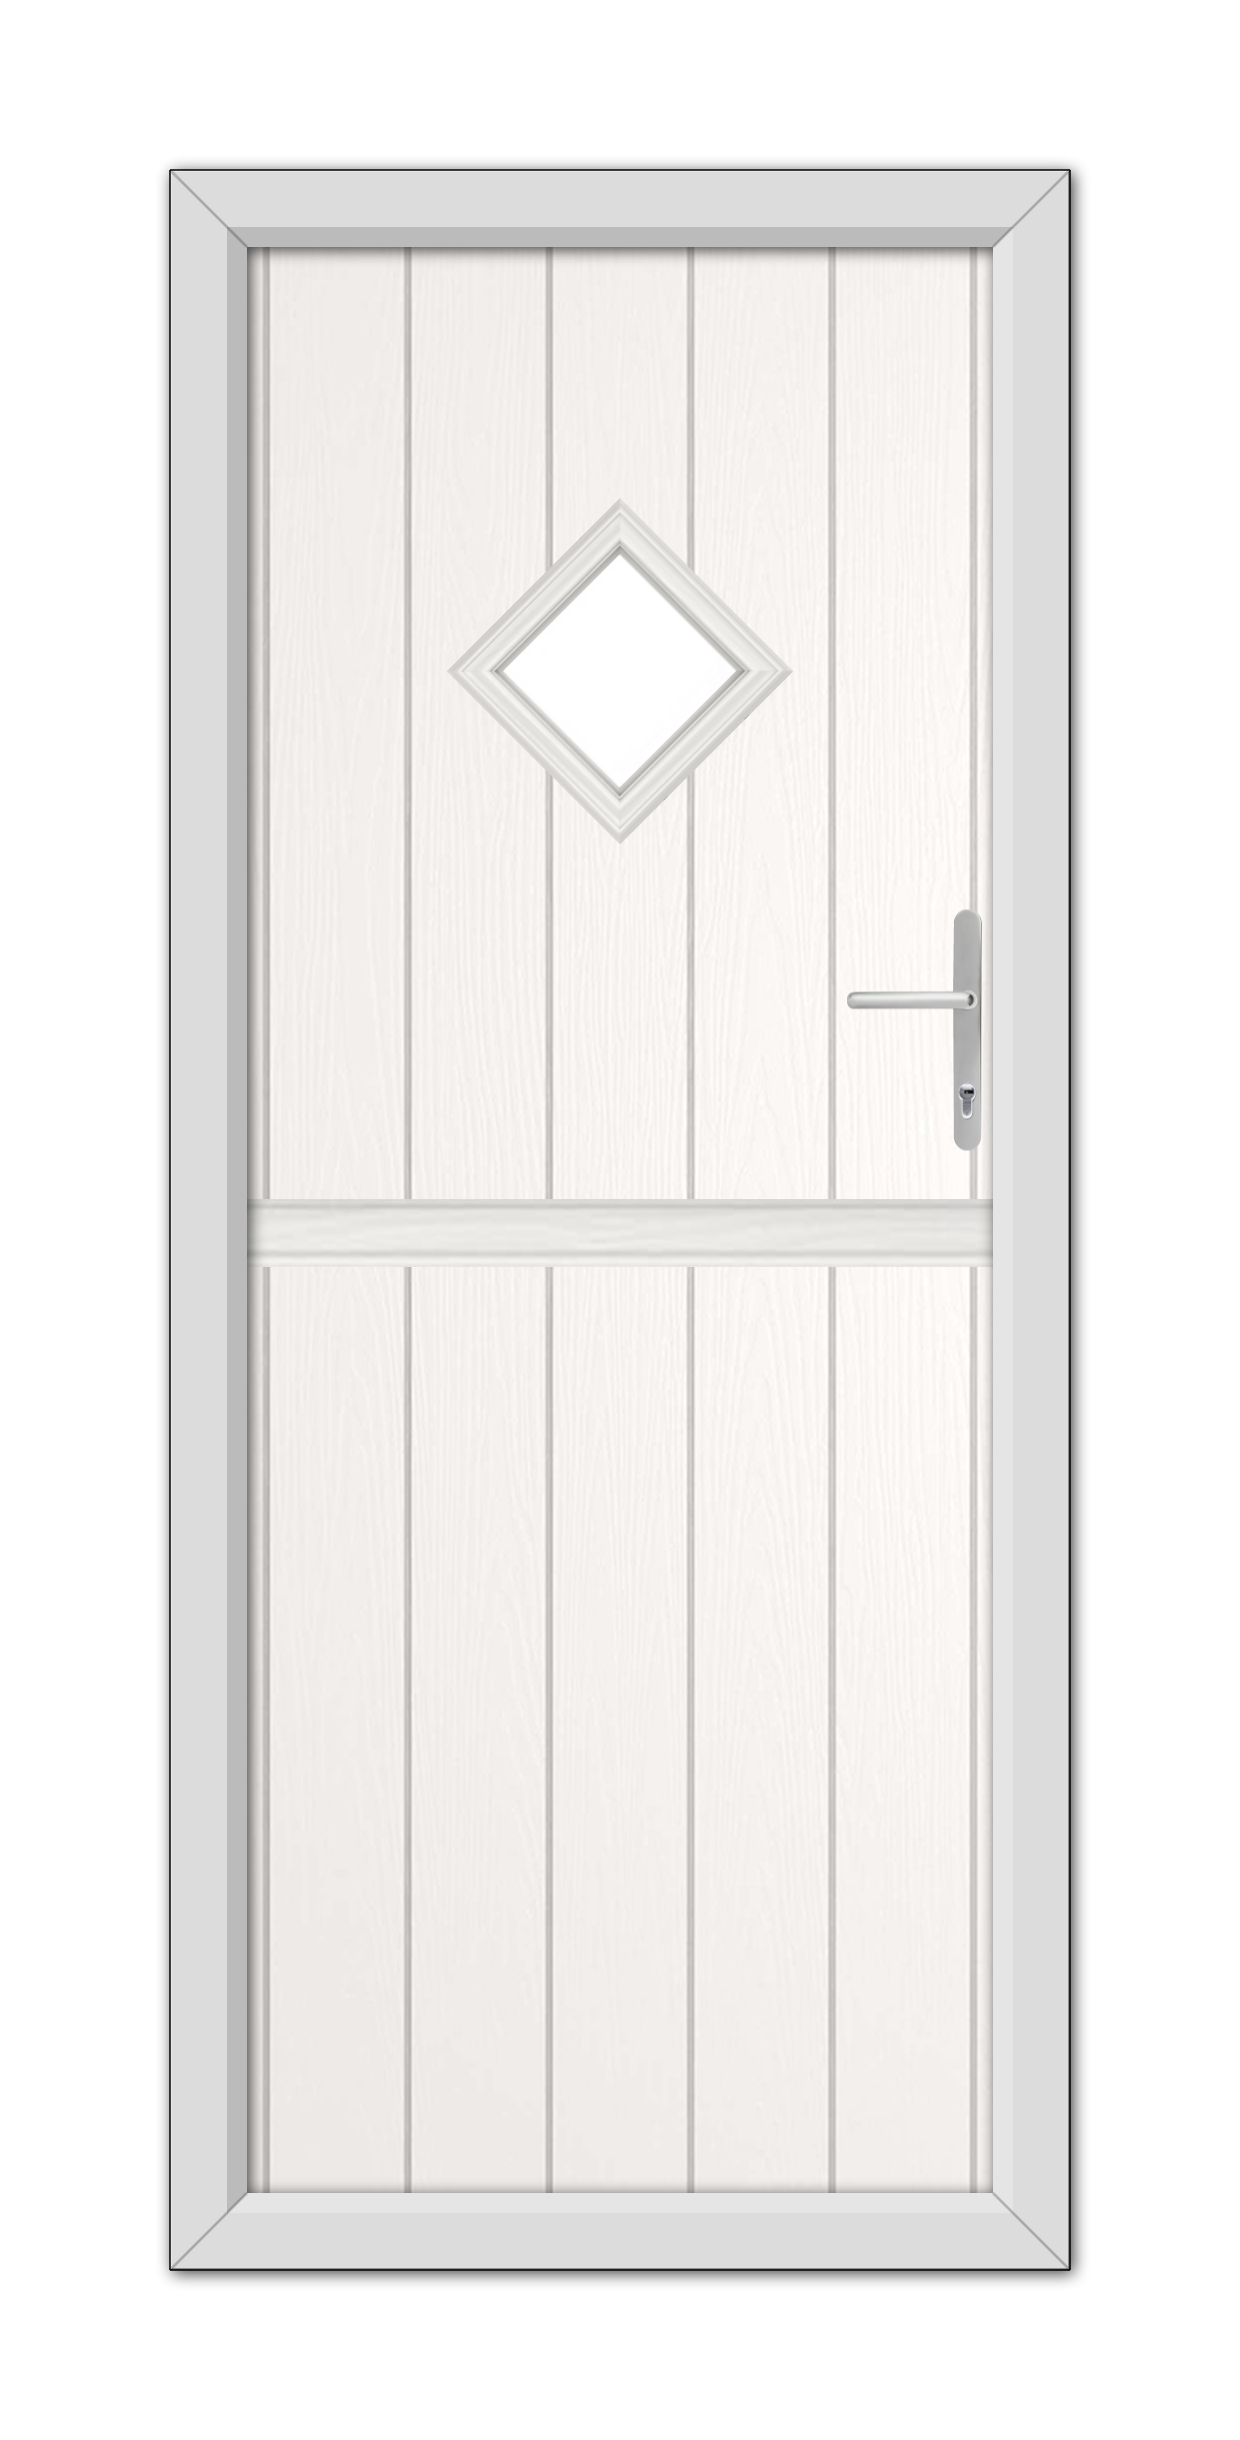 A modern White Cornwall Stable Composite Door 48mm Timber Core with a diamond-shaped window at the top, a horizontal panel in the middle, and a silver handle on the right side.